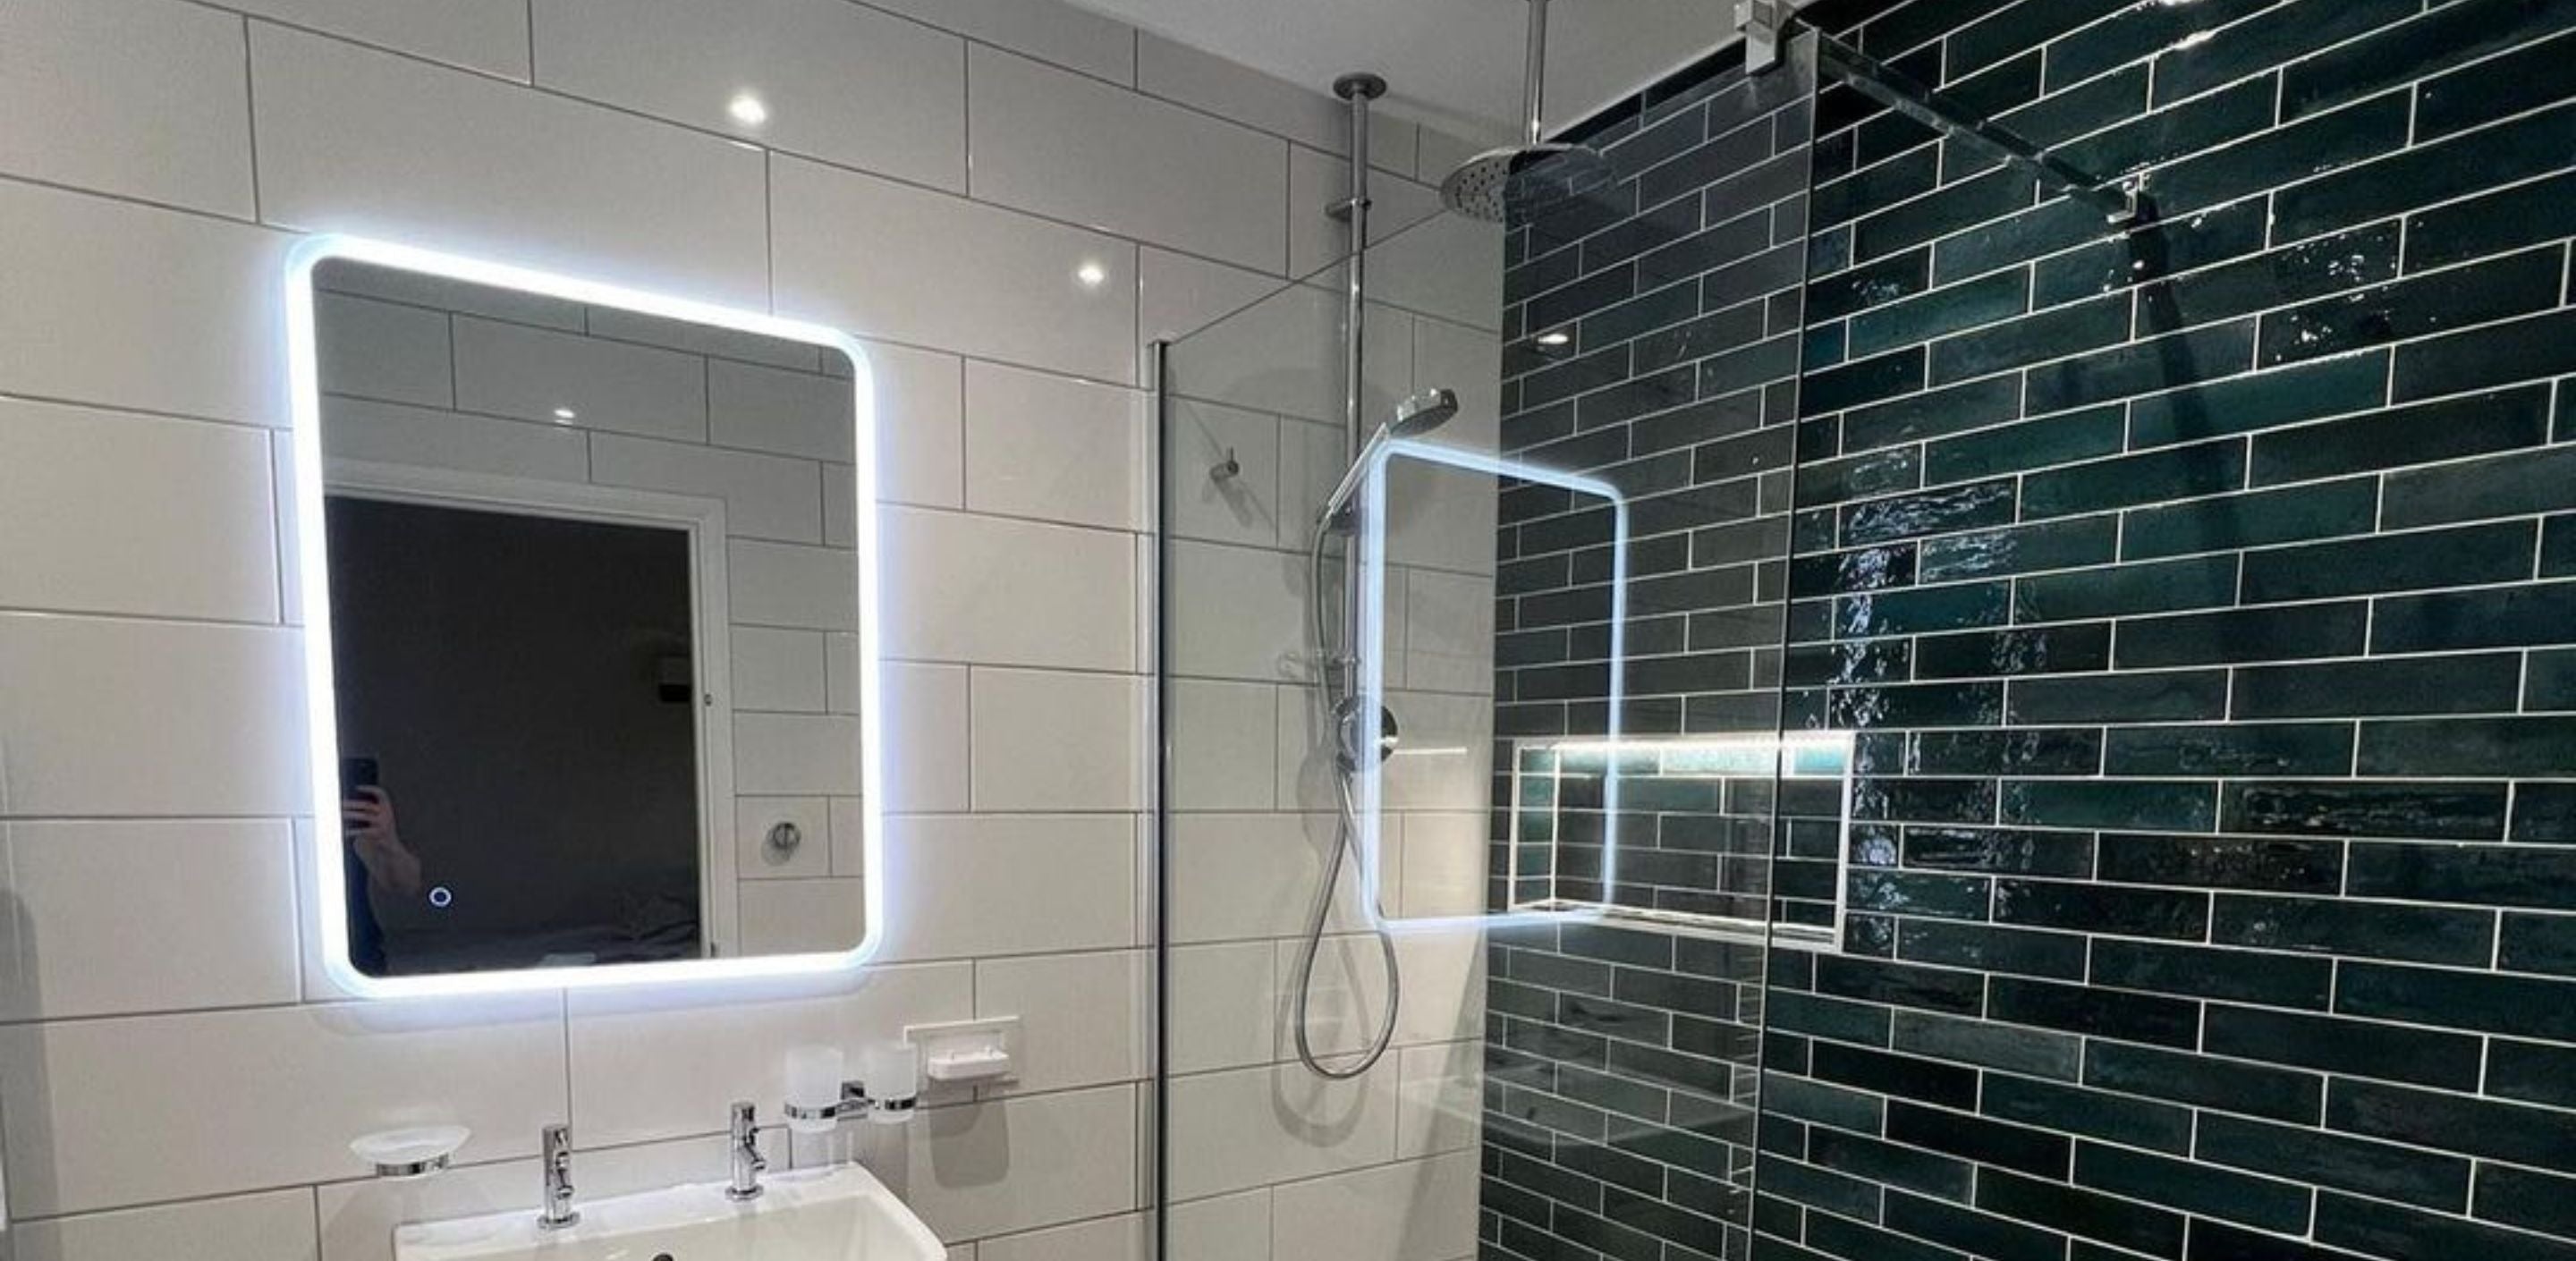 Enhancing your Bathroom with a Backlit Mirror